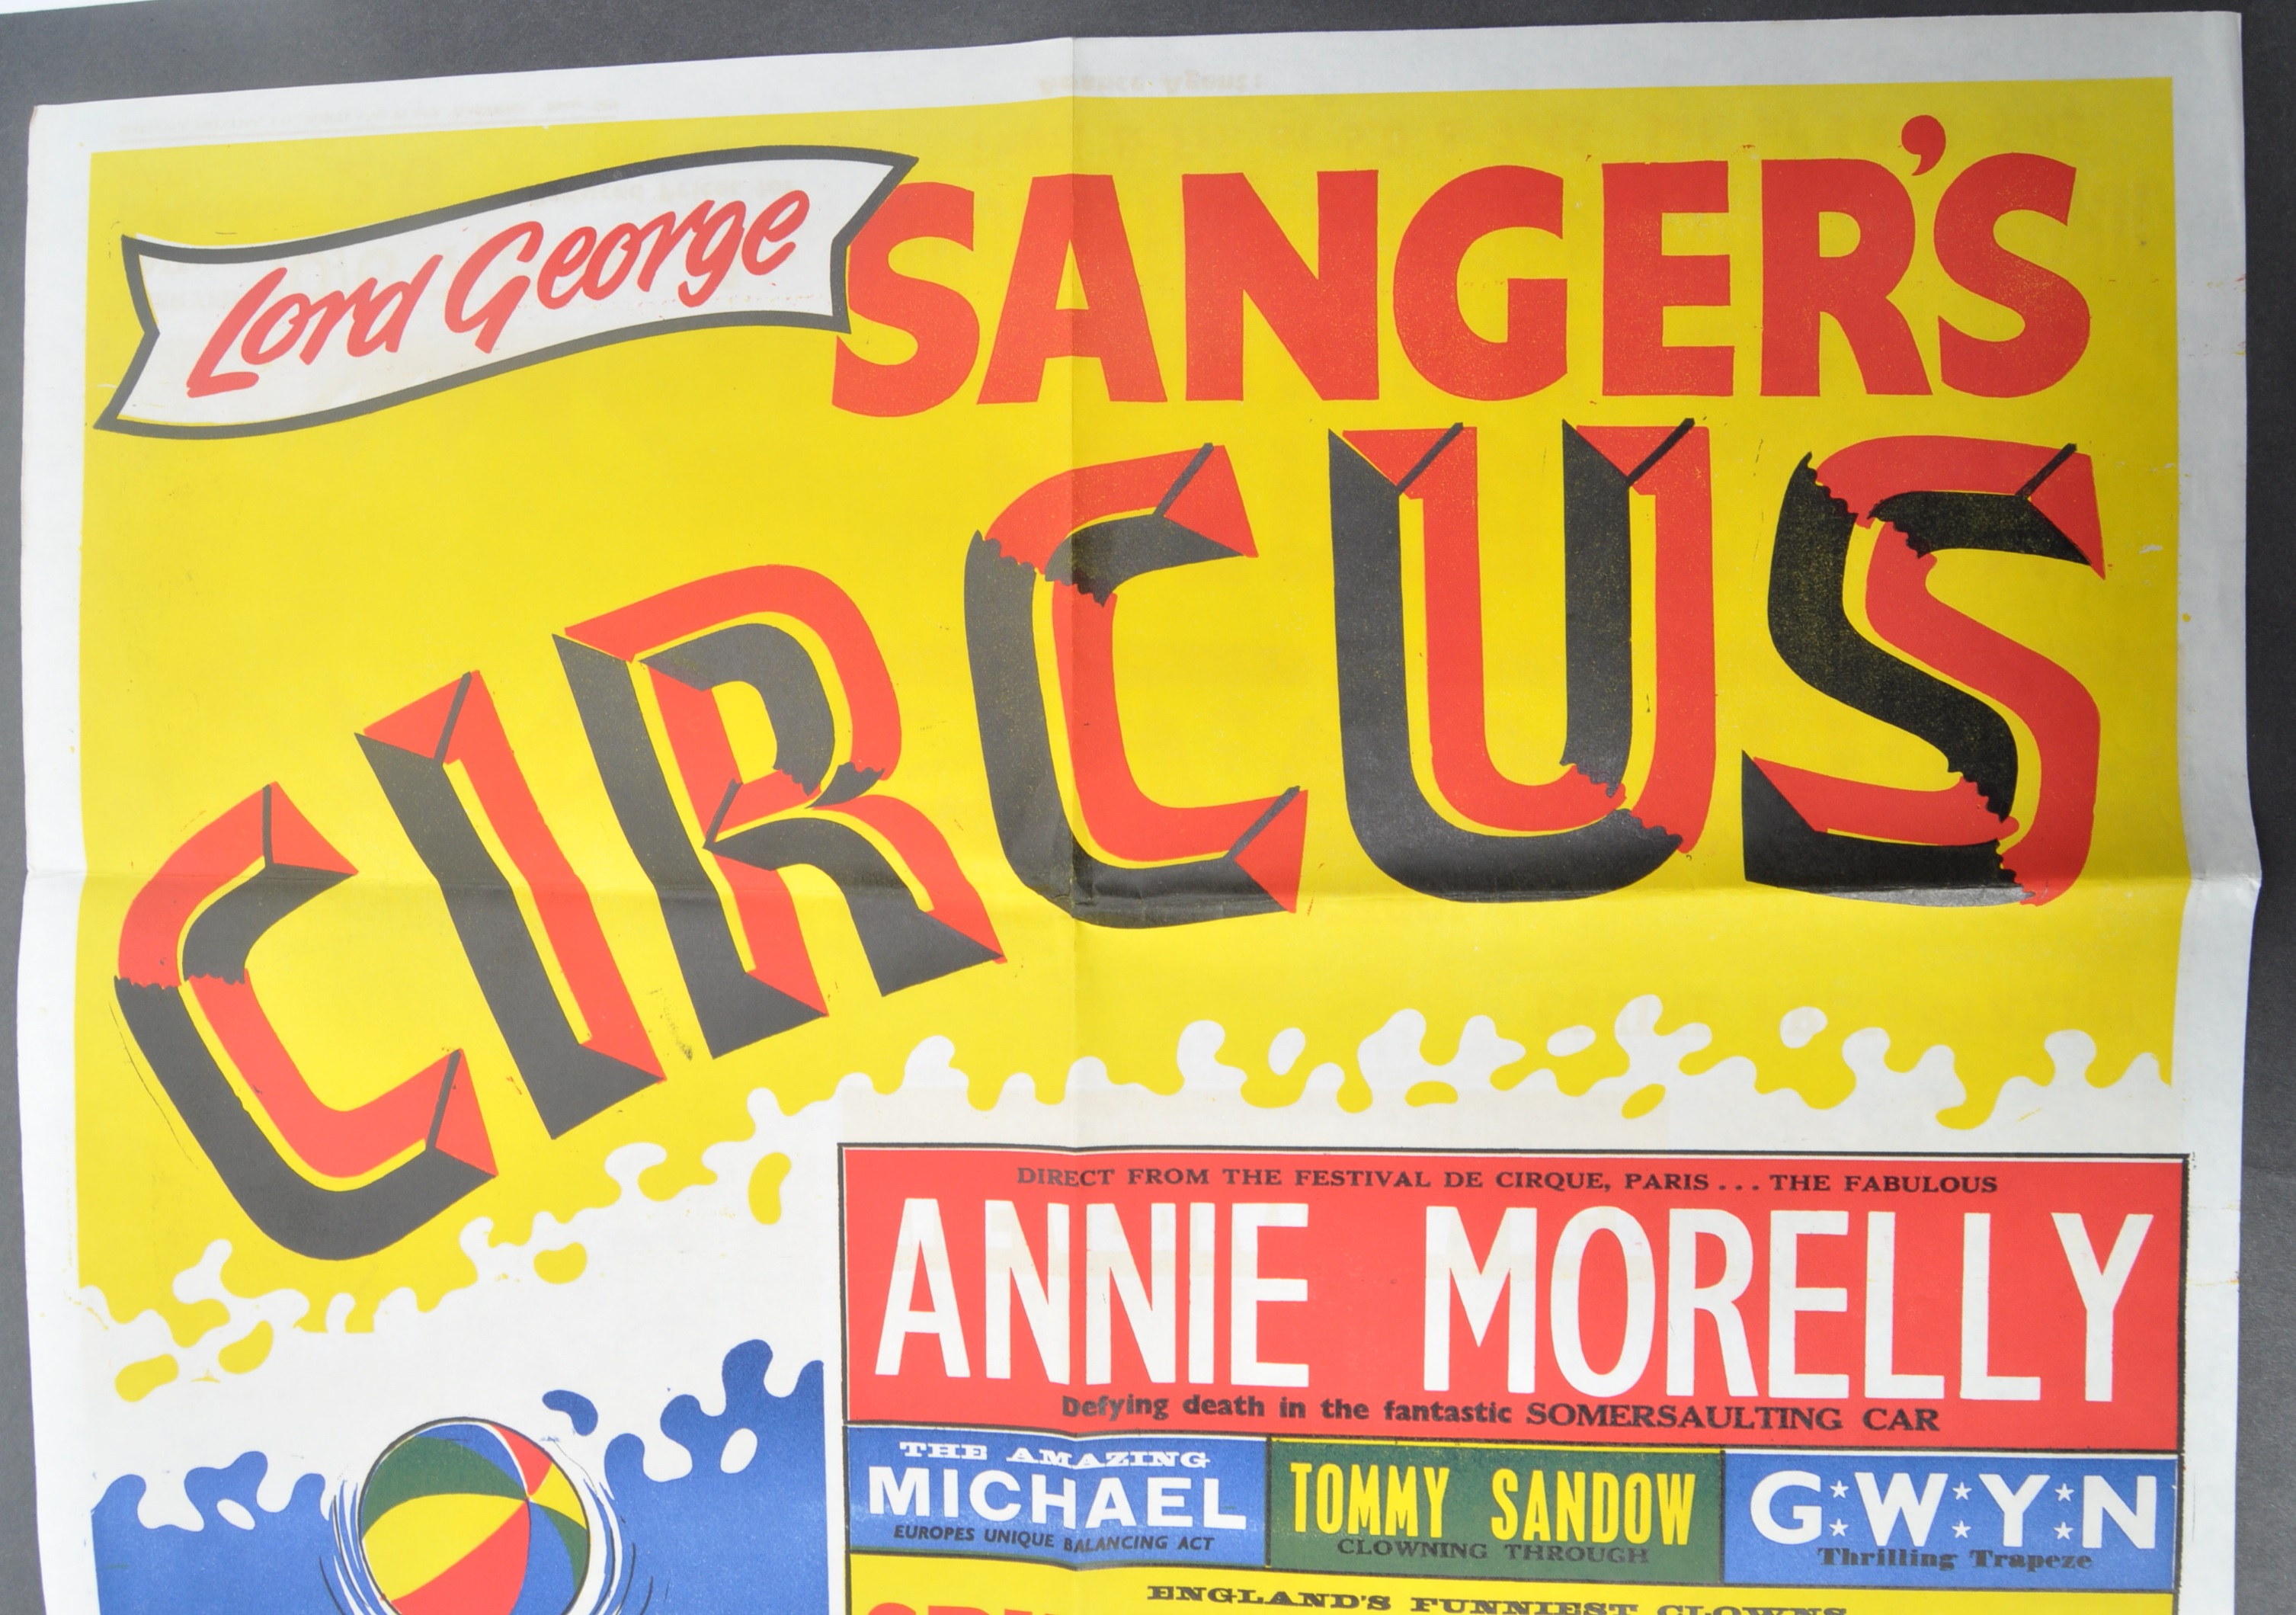 LORD GEORGE SANGER'S CIRCUS - ORIGINAL 1960S ADVERTISING POSTER - Image 2 of 4